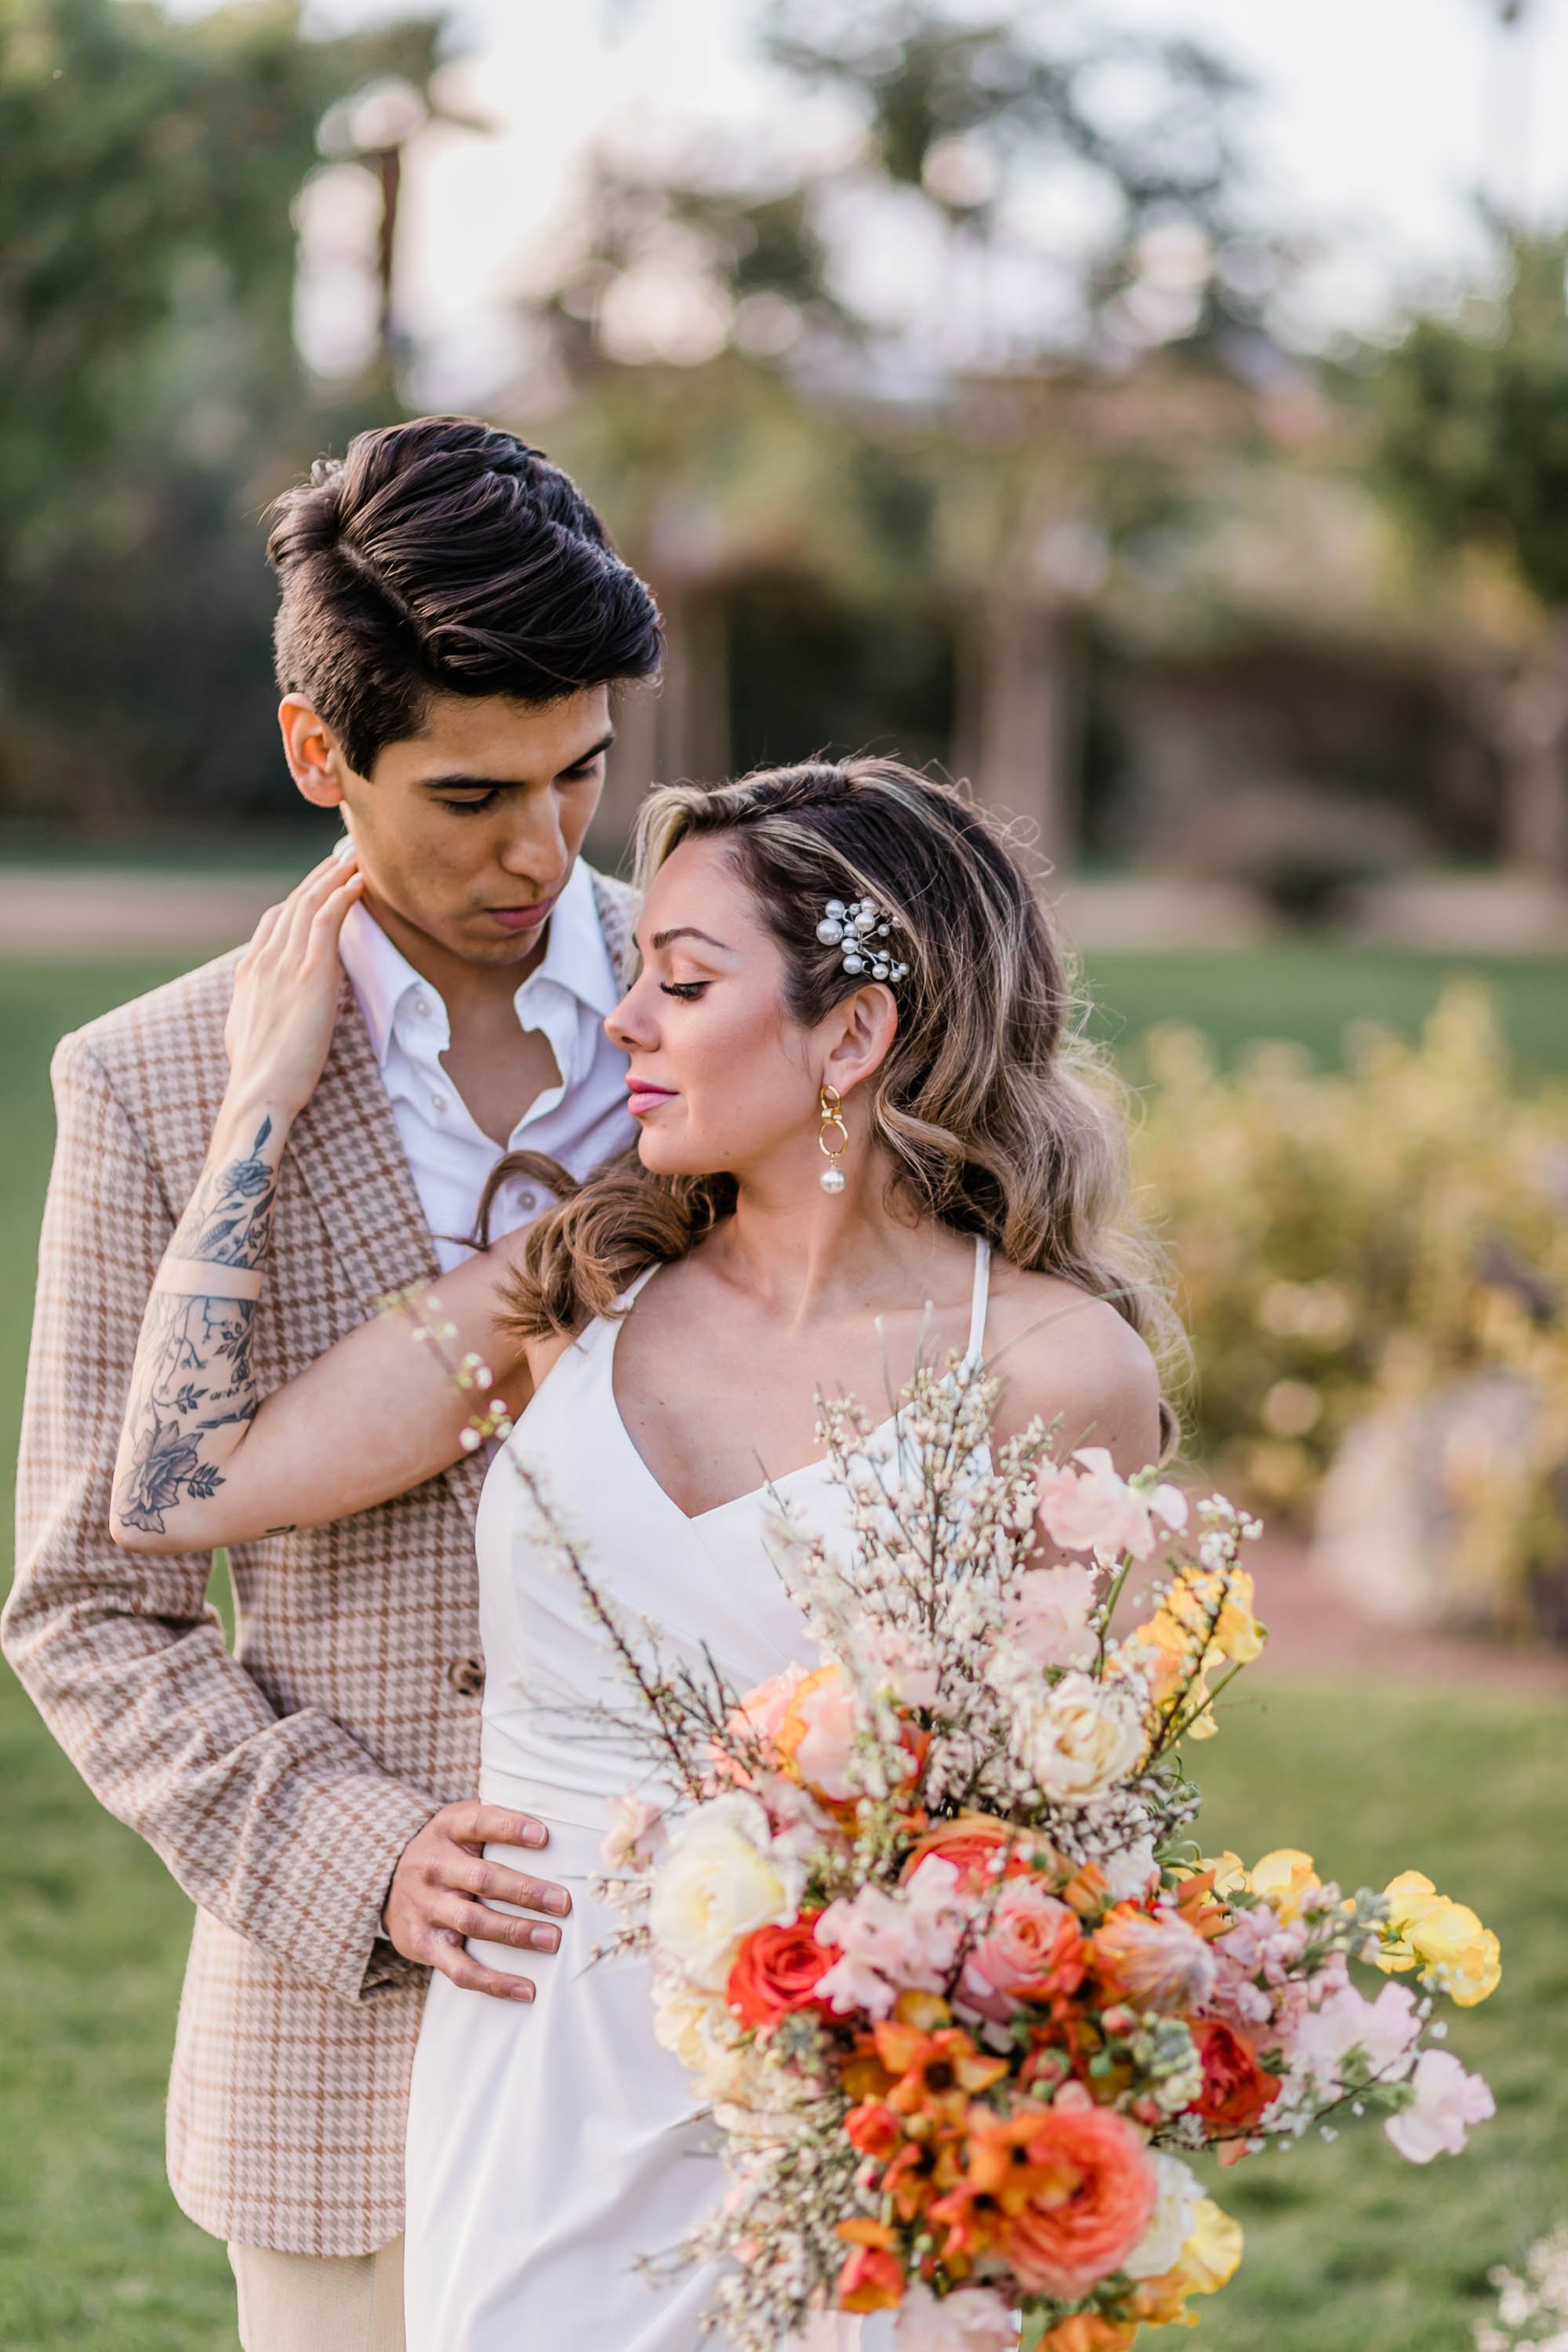 Romantic portrait session at Palm Springs wedding ceremony at Bougainvillea Estate. Lakeside Palm Springs wedding location Bougainvillea Estate. 